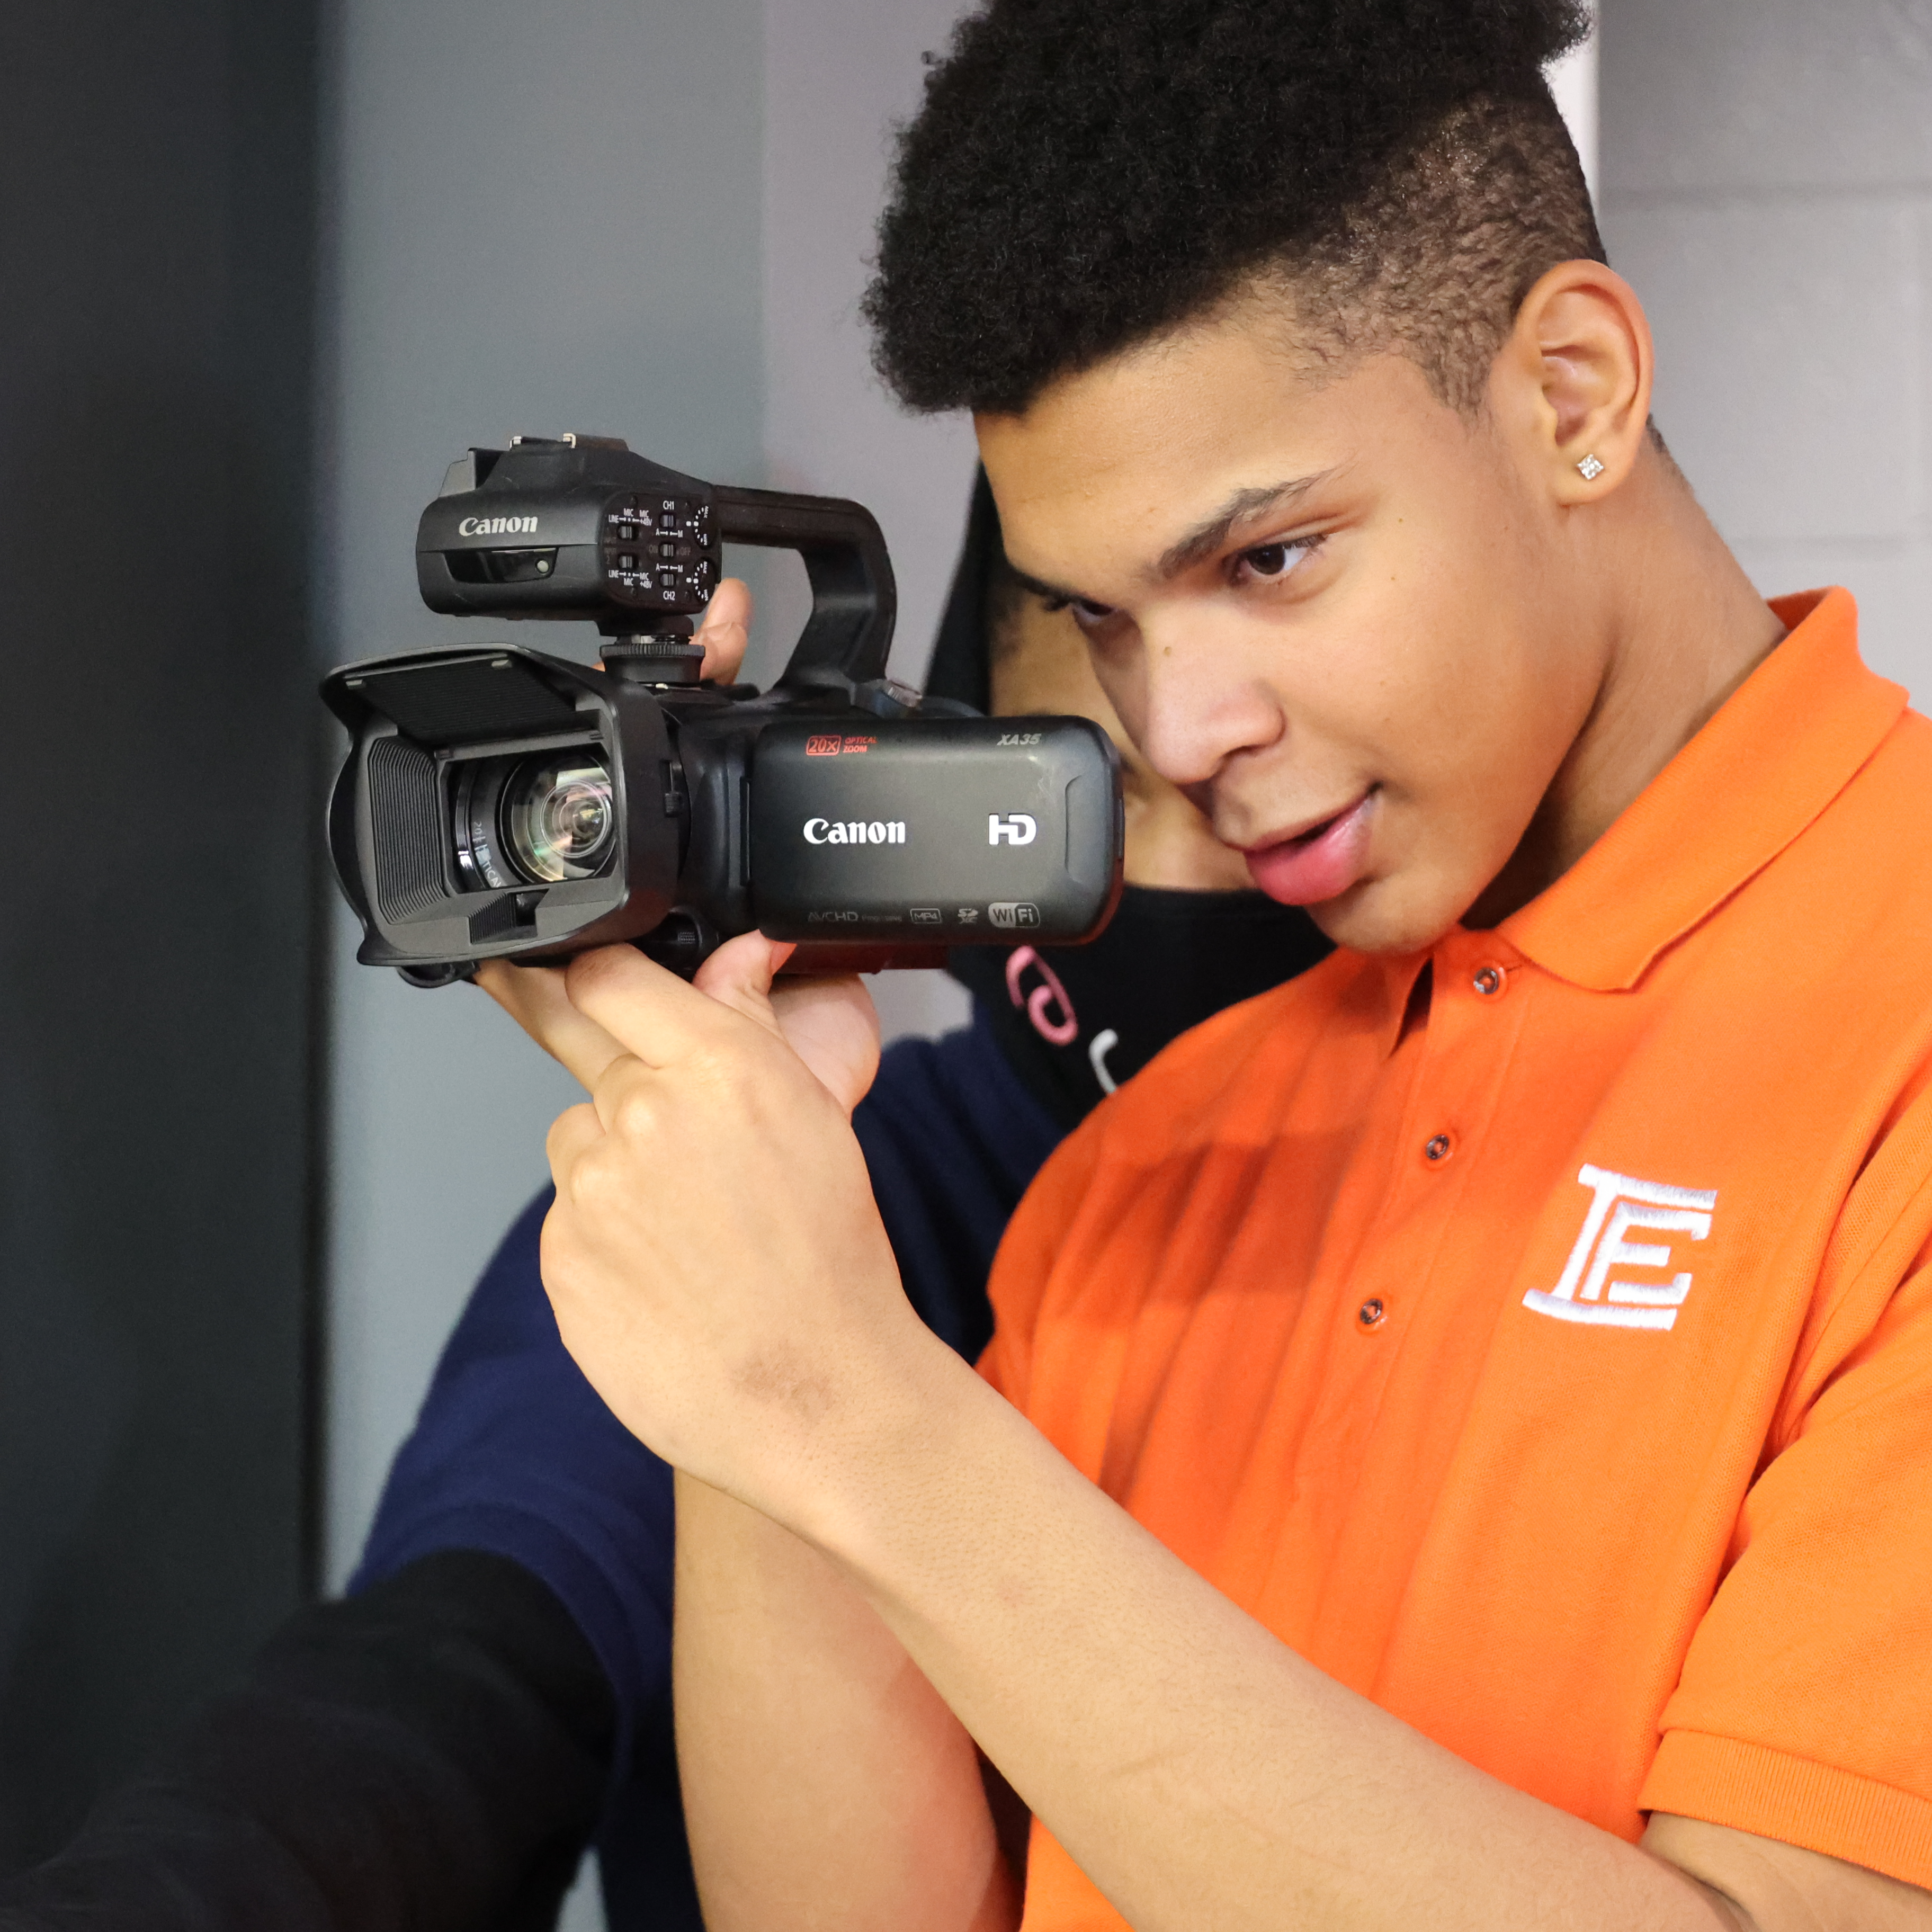 A male, Black student student holds a video camera while trying to capture a scene.